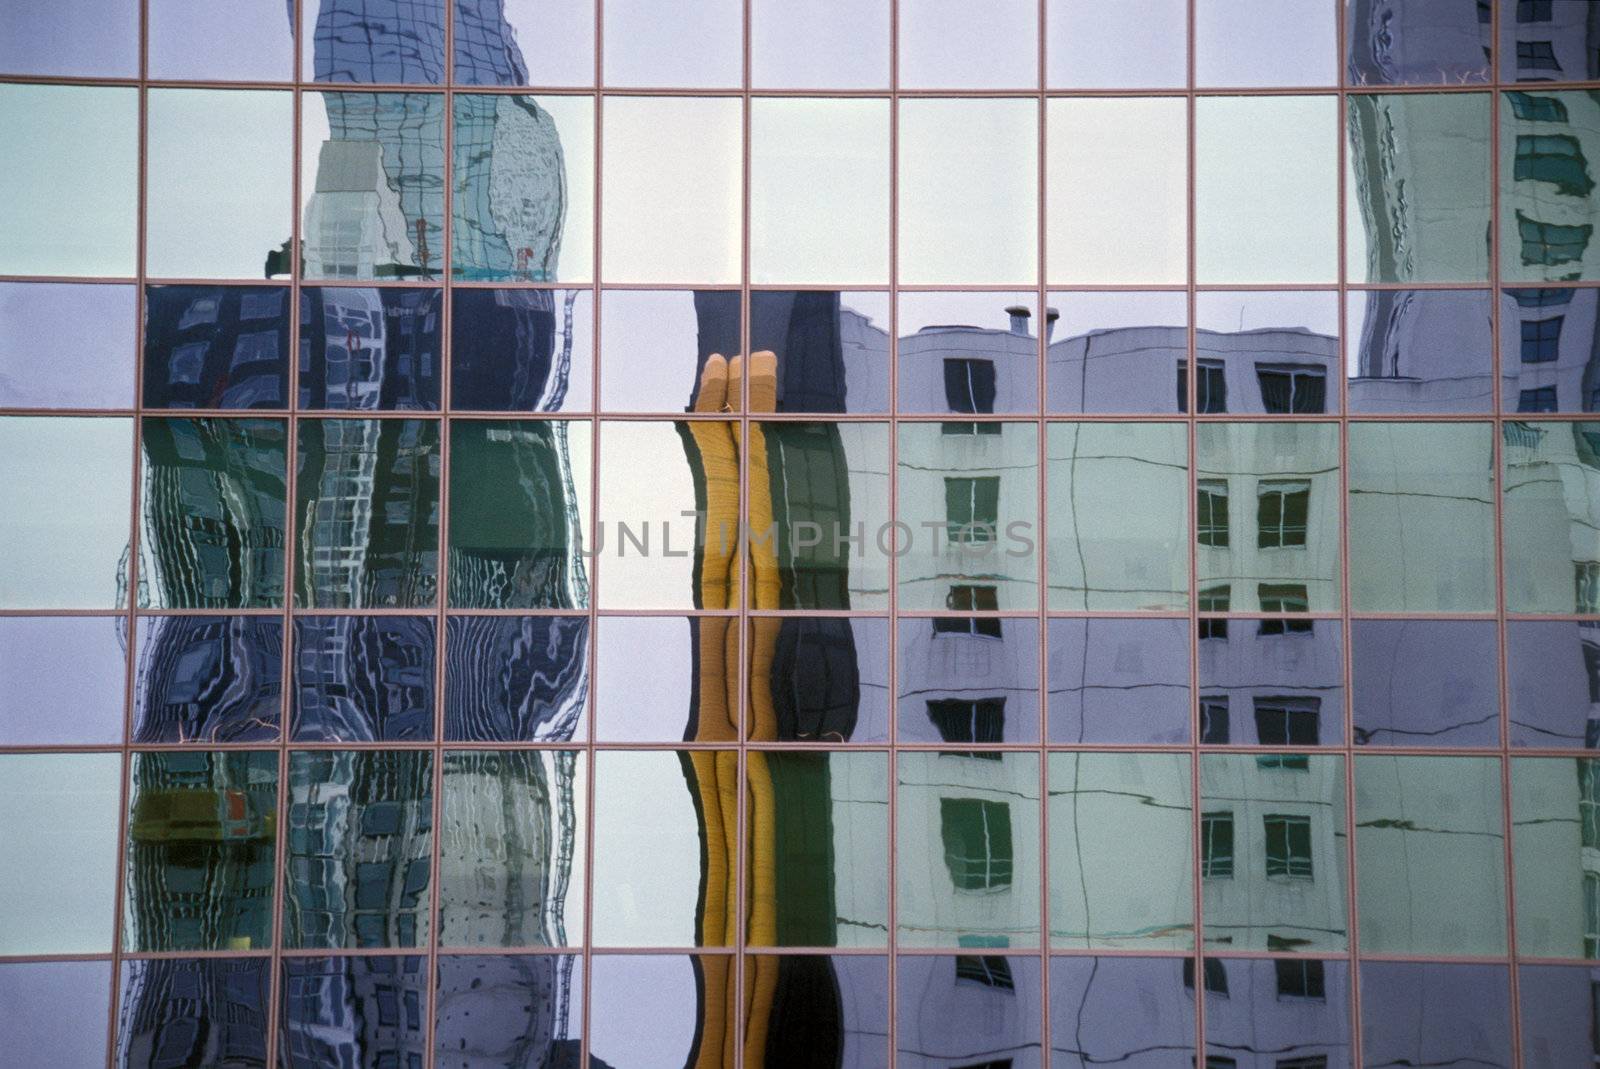 Reflection of a modern office building in the mirrored glass of another office tower. 